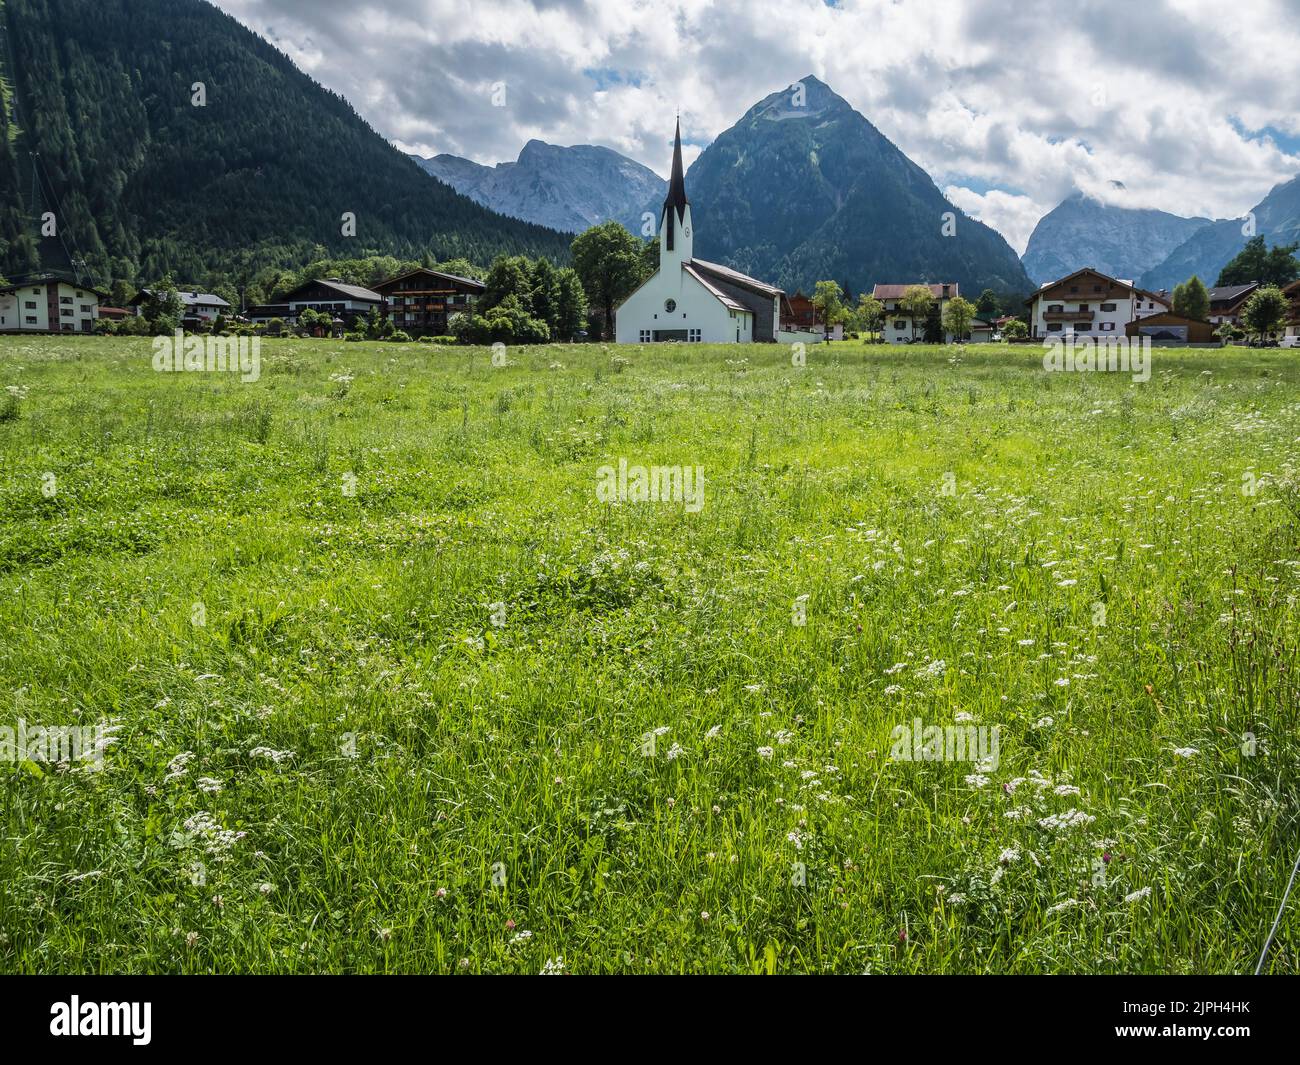 Colourful scene looking to the Dreifaltigkeitskirche [church of the Holy Trinity] church in the resort town of Pertisau on the shore of Lake Achensee Stock Photo